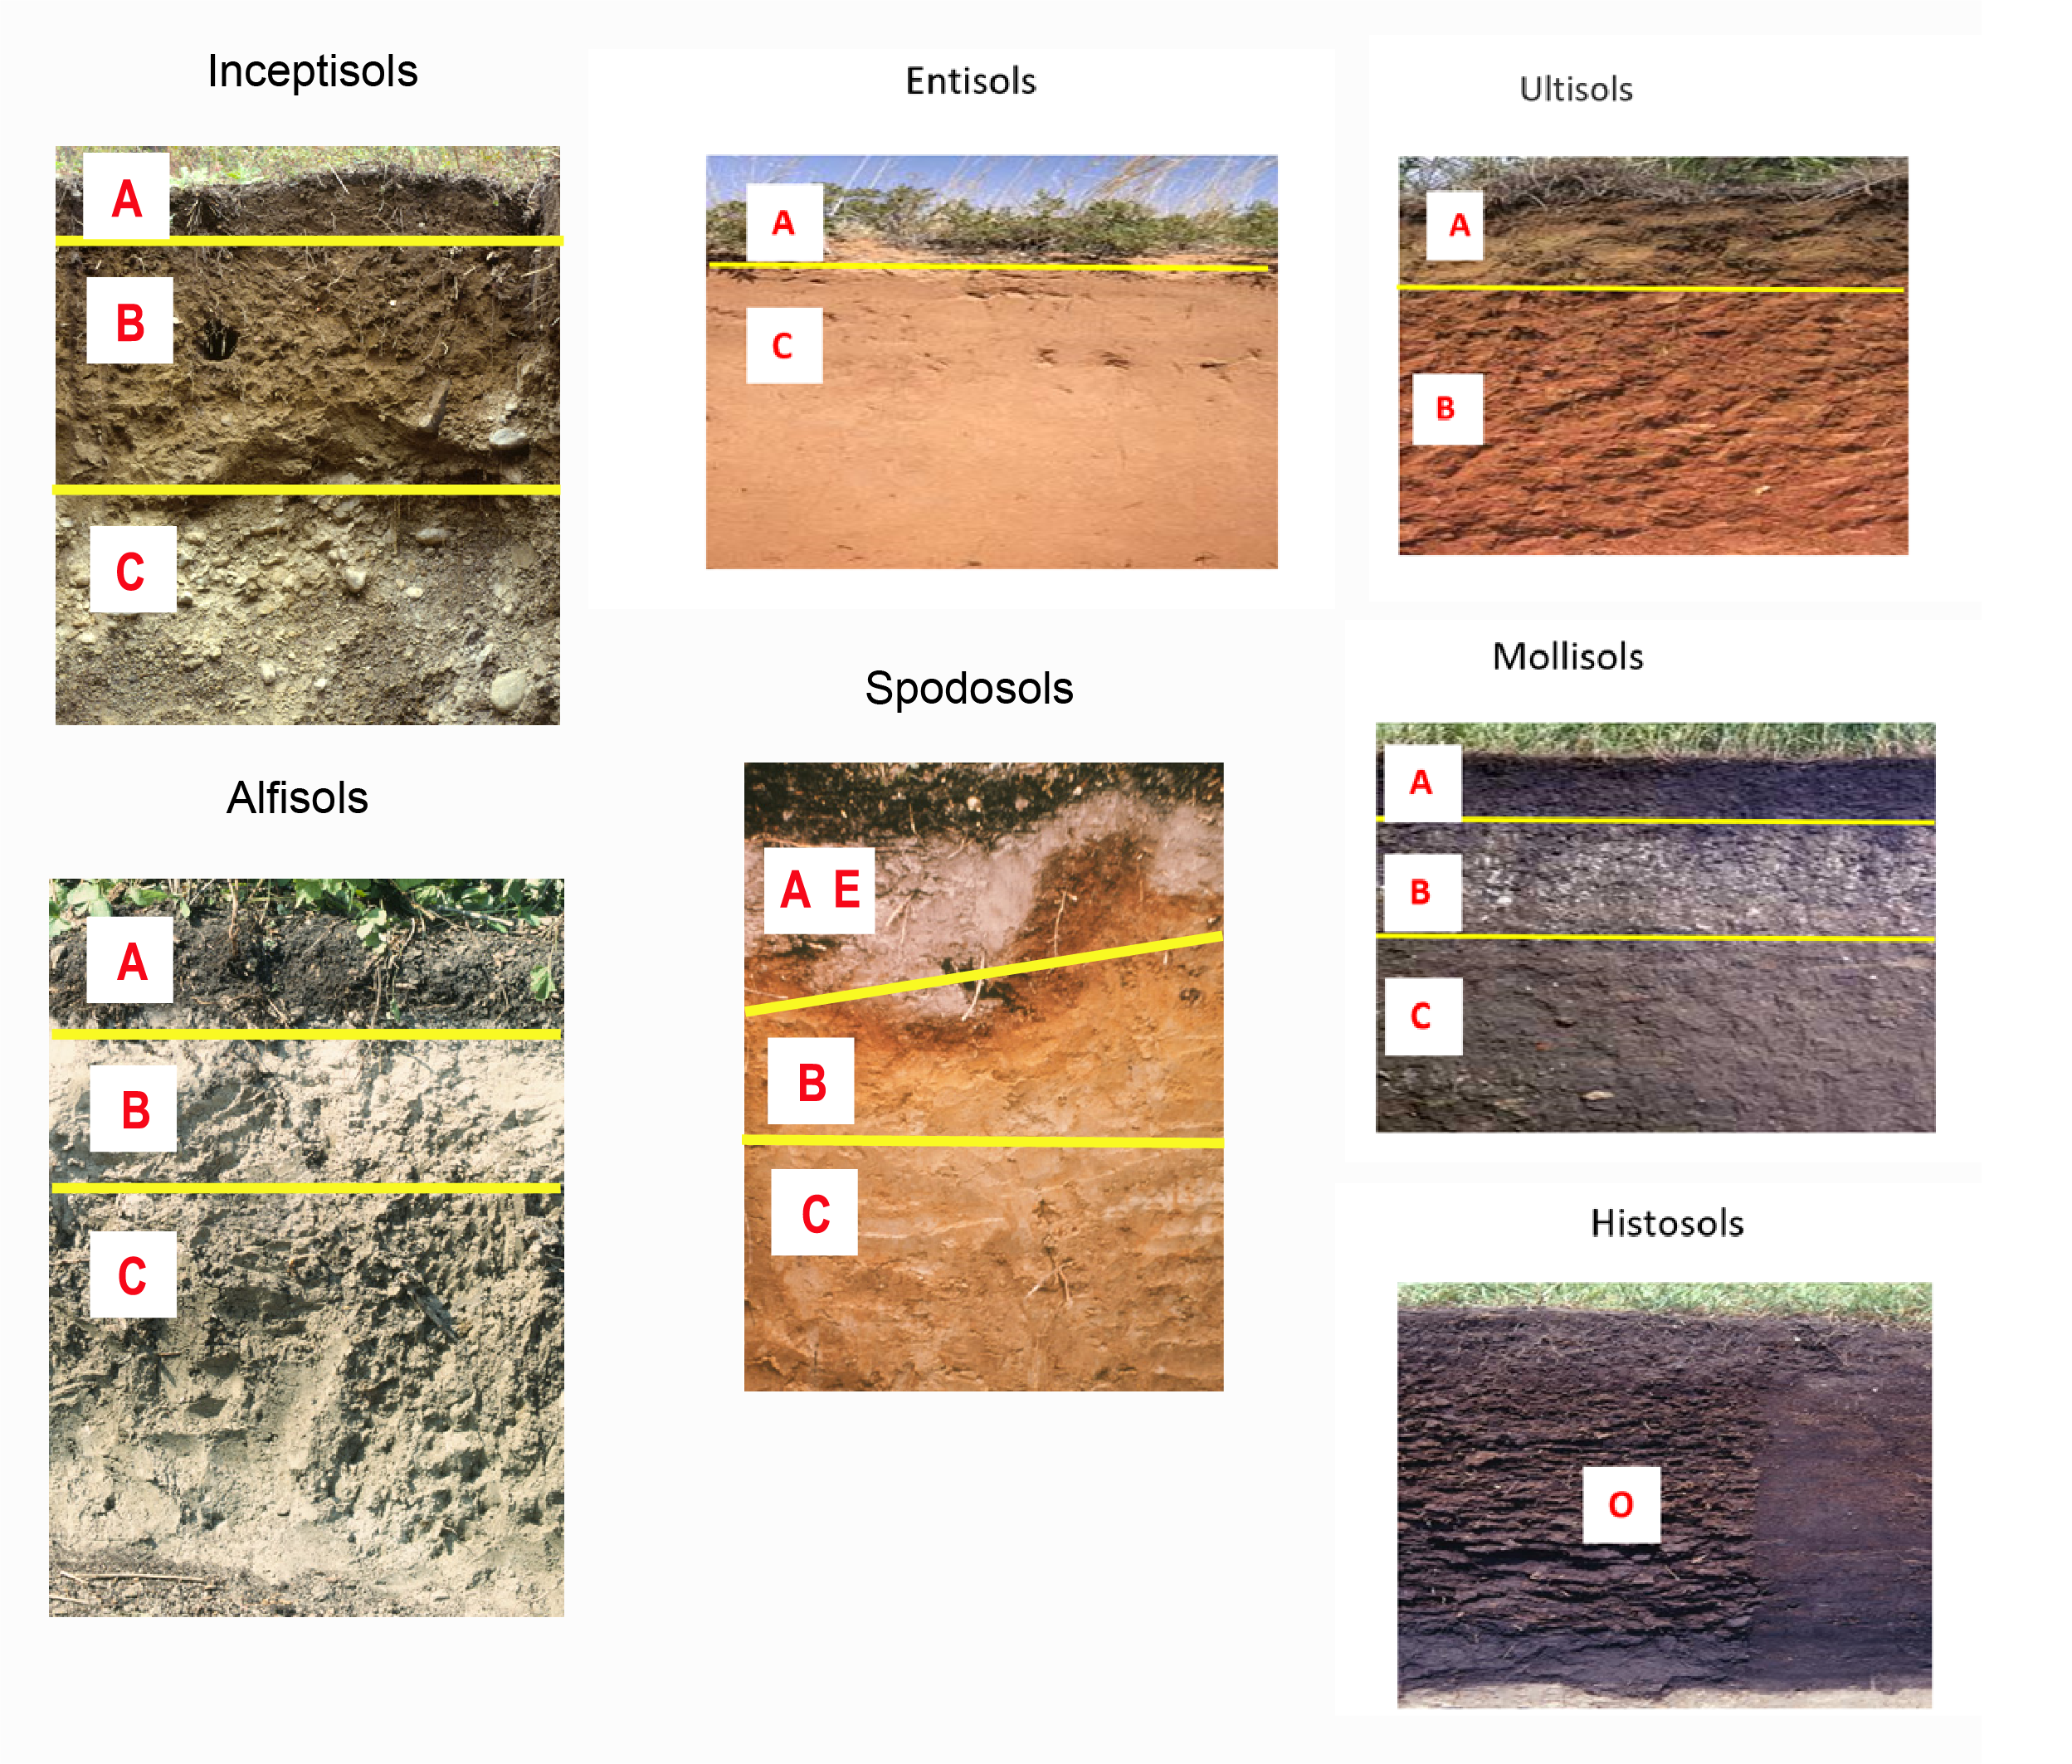 diagrams of different soil types that indicate the horizions within each type. Included are diagrams of Inceptisols (horizons a, b, and c labeled), entisols (horizon a, and c labeled), utilsols (horizons a and b labeled), alfisols (horizon a, b, and c labeled) spodosols (horizons a and e mixed, b, and c labeled) mollisols (horizons a, b and c labeled), and histosols (only horizon o)